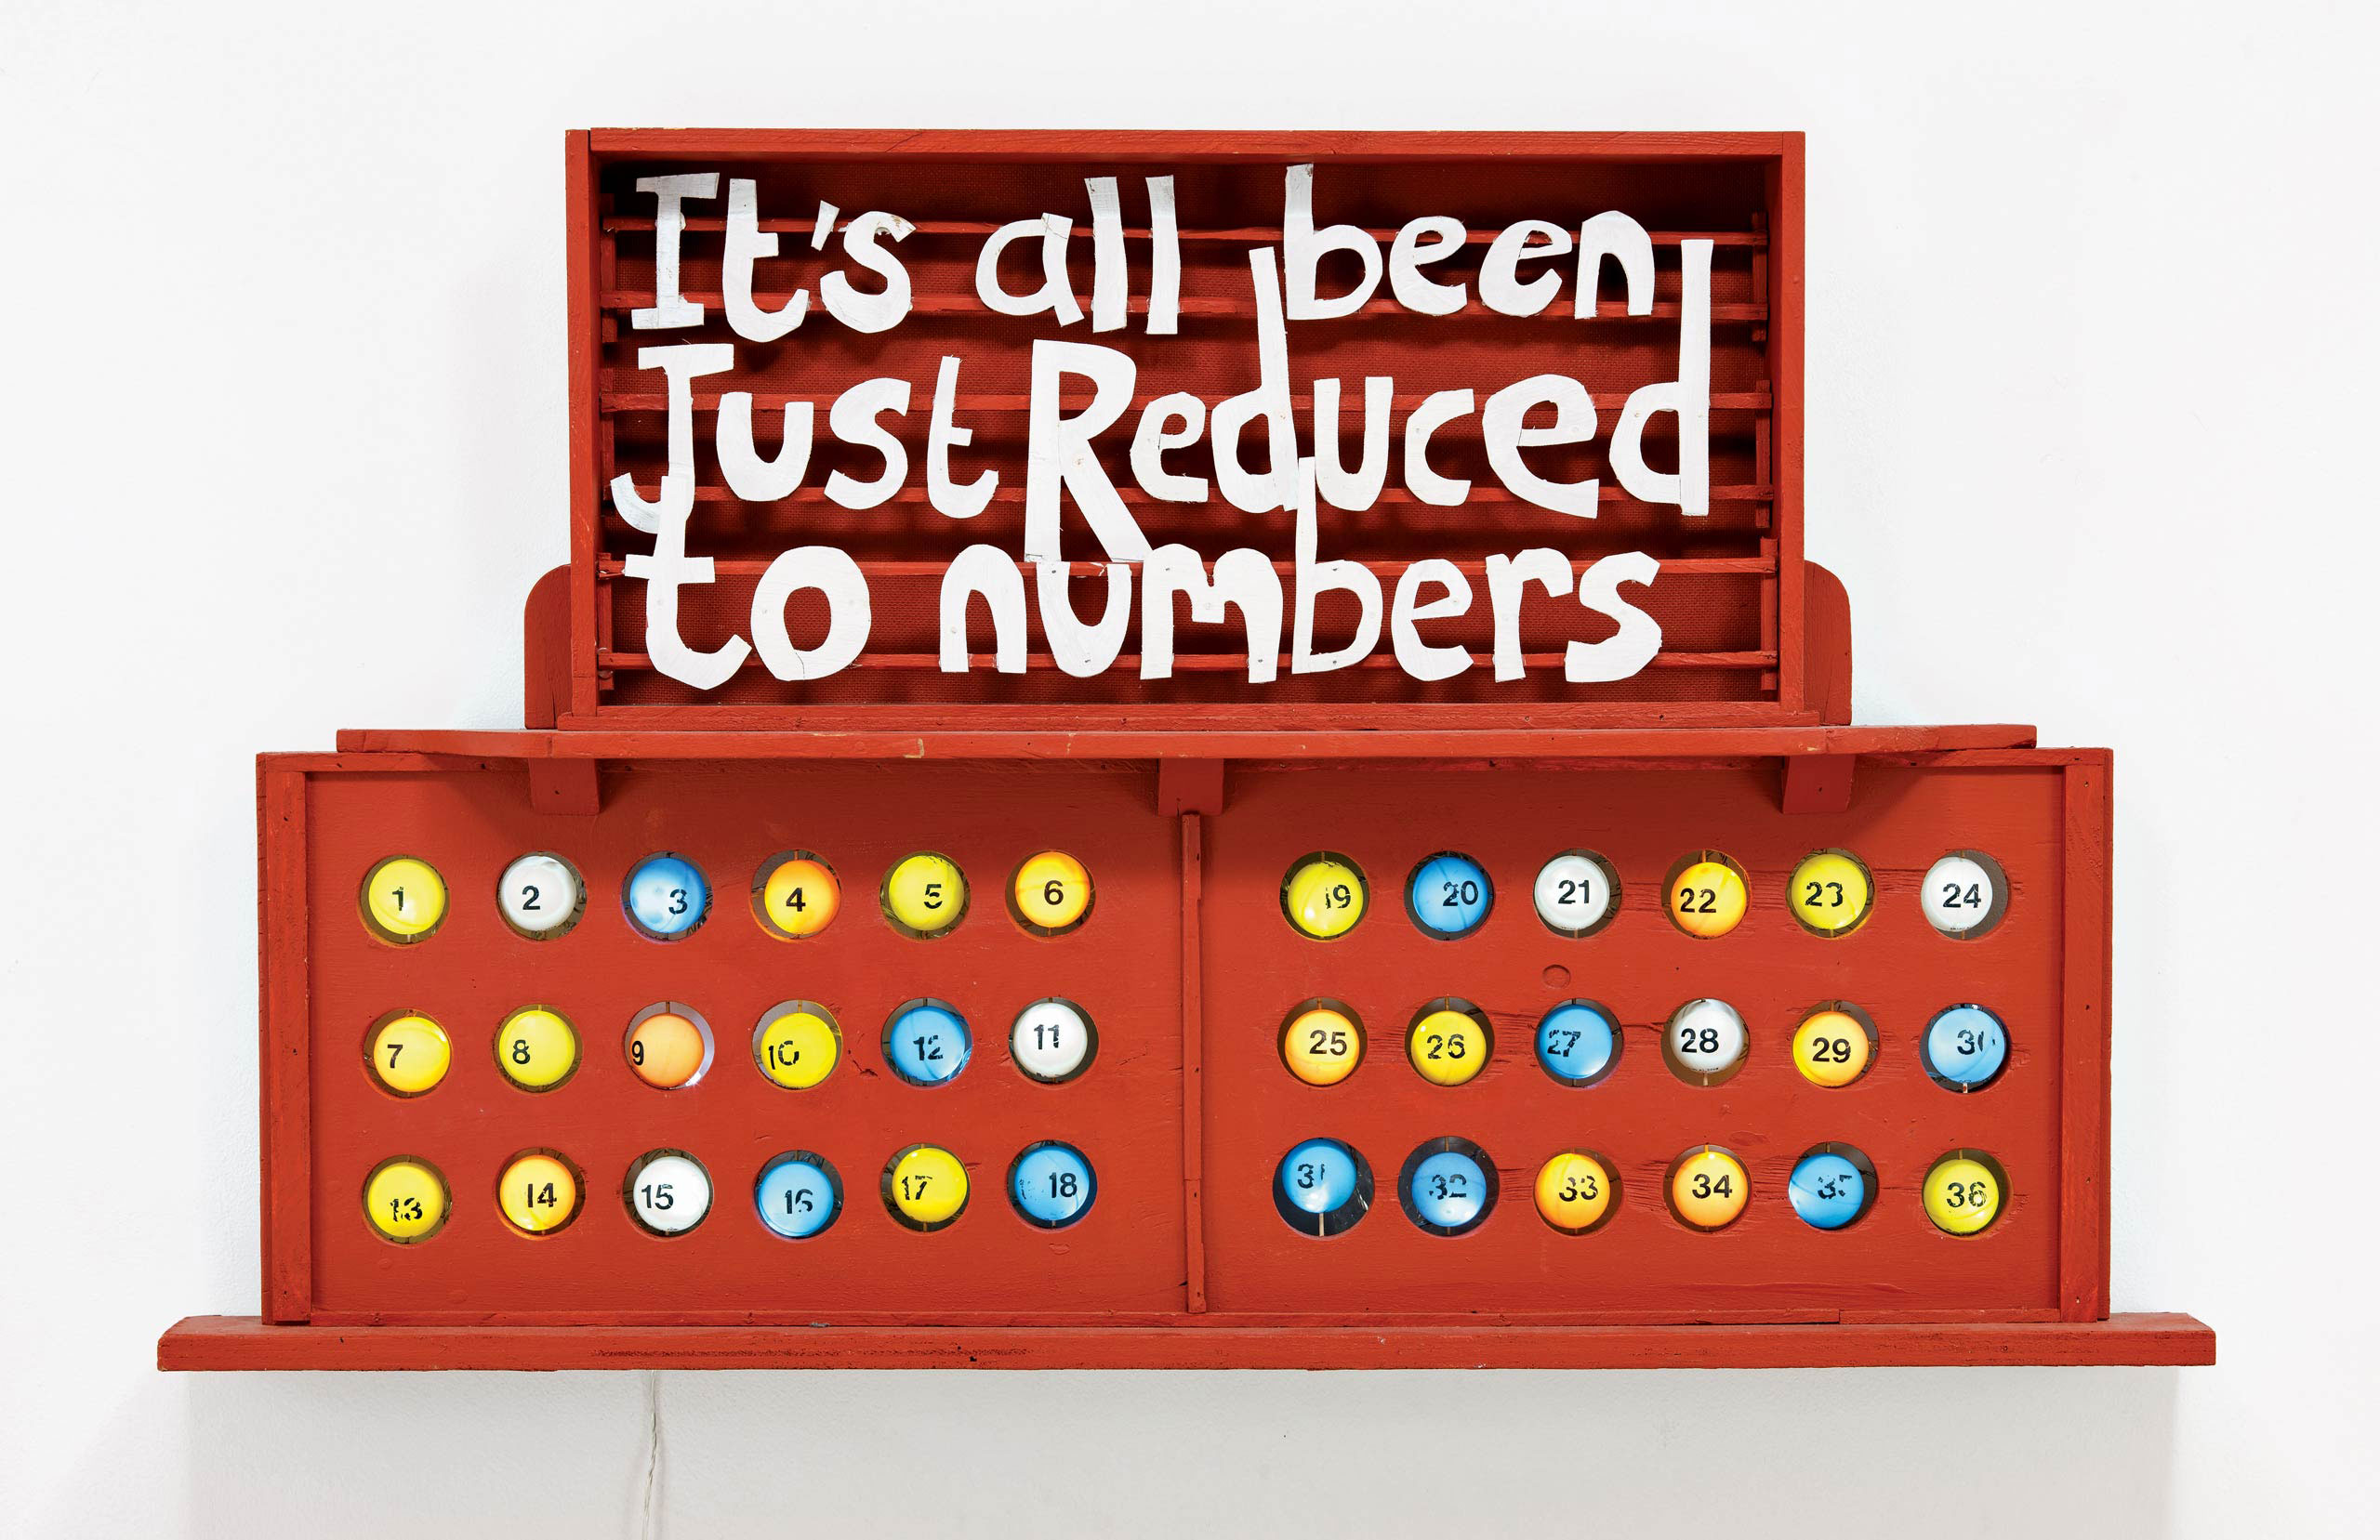 IT’S ALL BEEN JUST REDUCED TO NUMBERS by Stephen Stockbridge 2014, 70 × 110 × 9 cm Wood, paint, LEDs, ping-pong balls. Courtesy of Tom Buchanan and 8 Books.